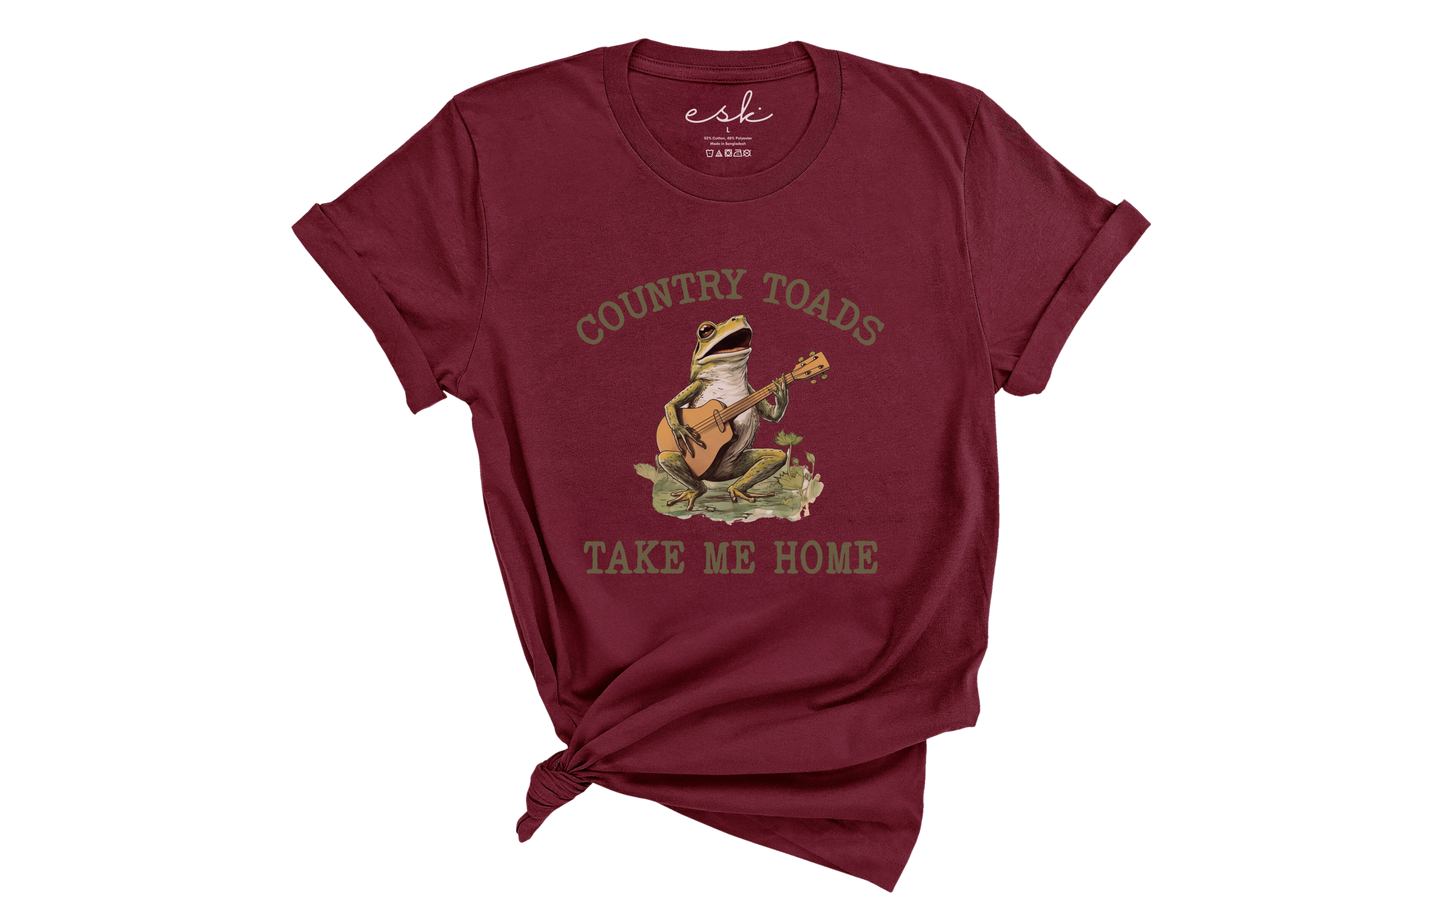 Country Toads Tee